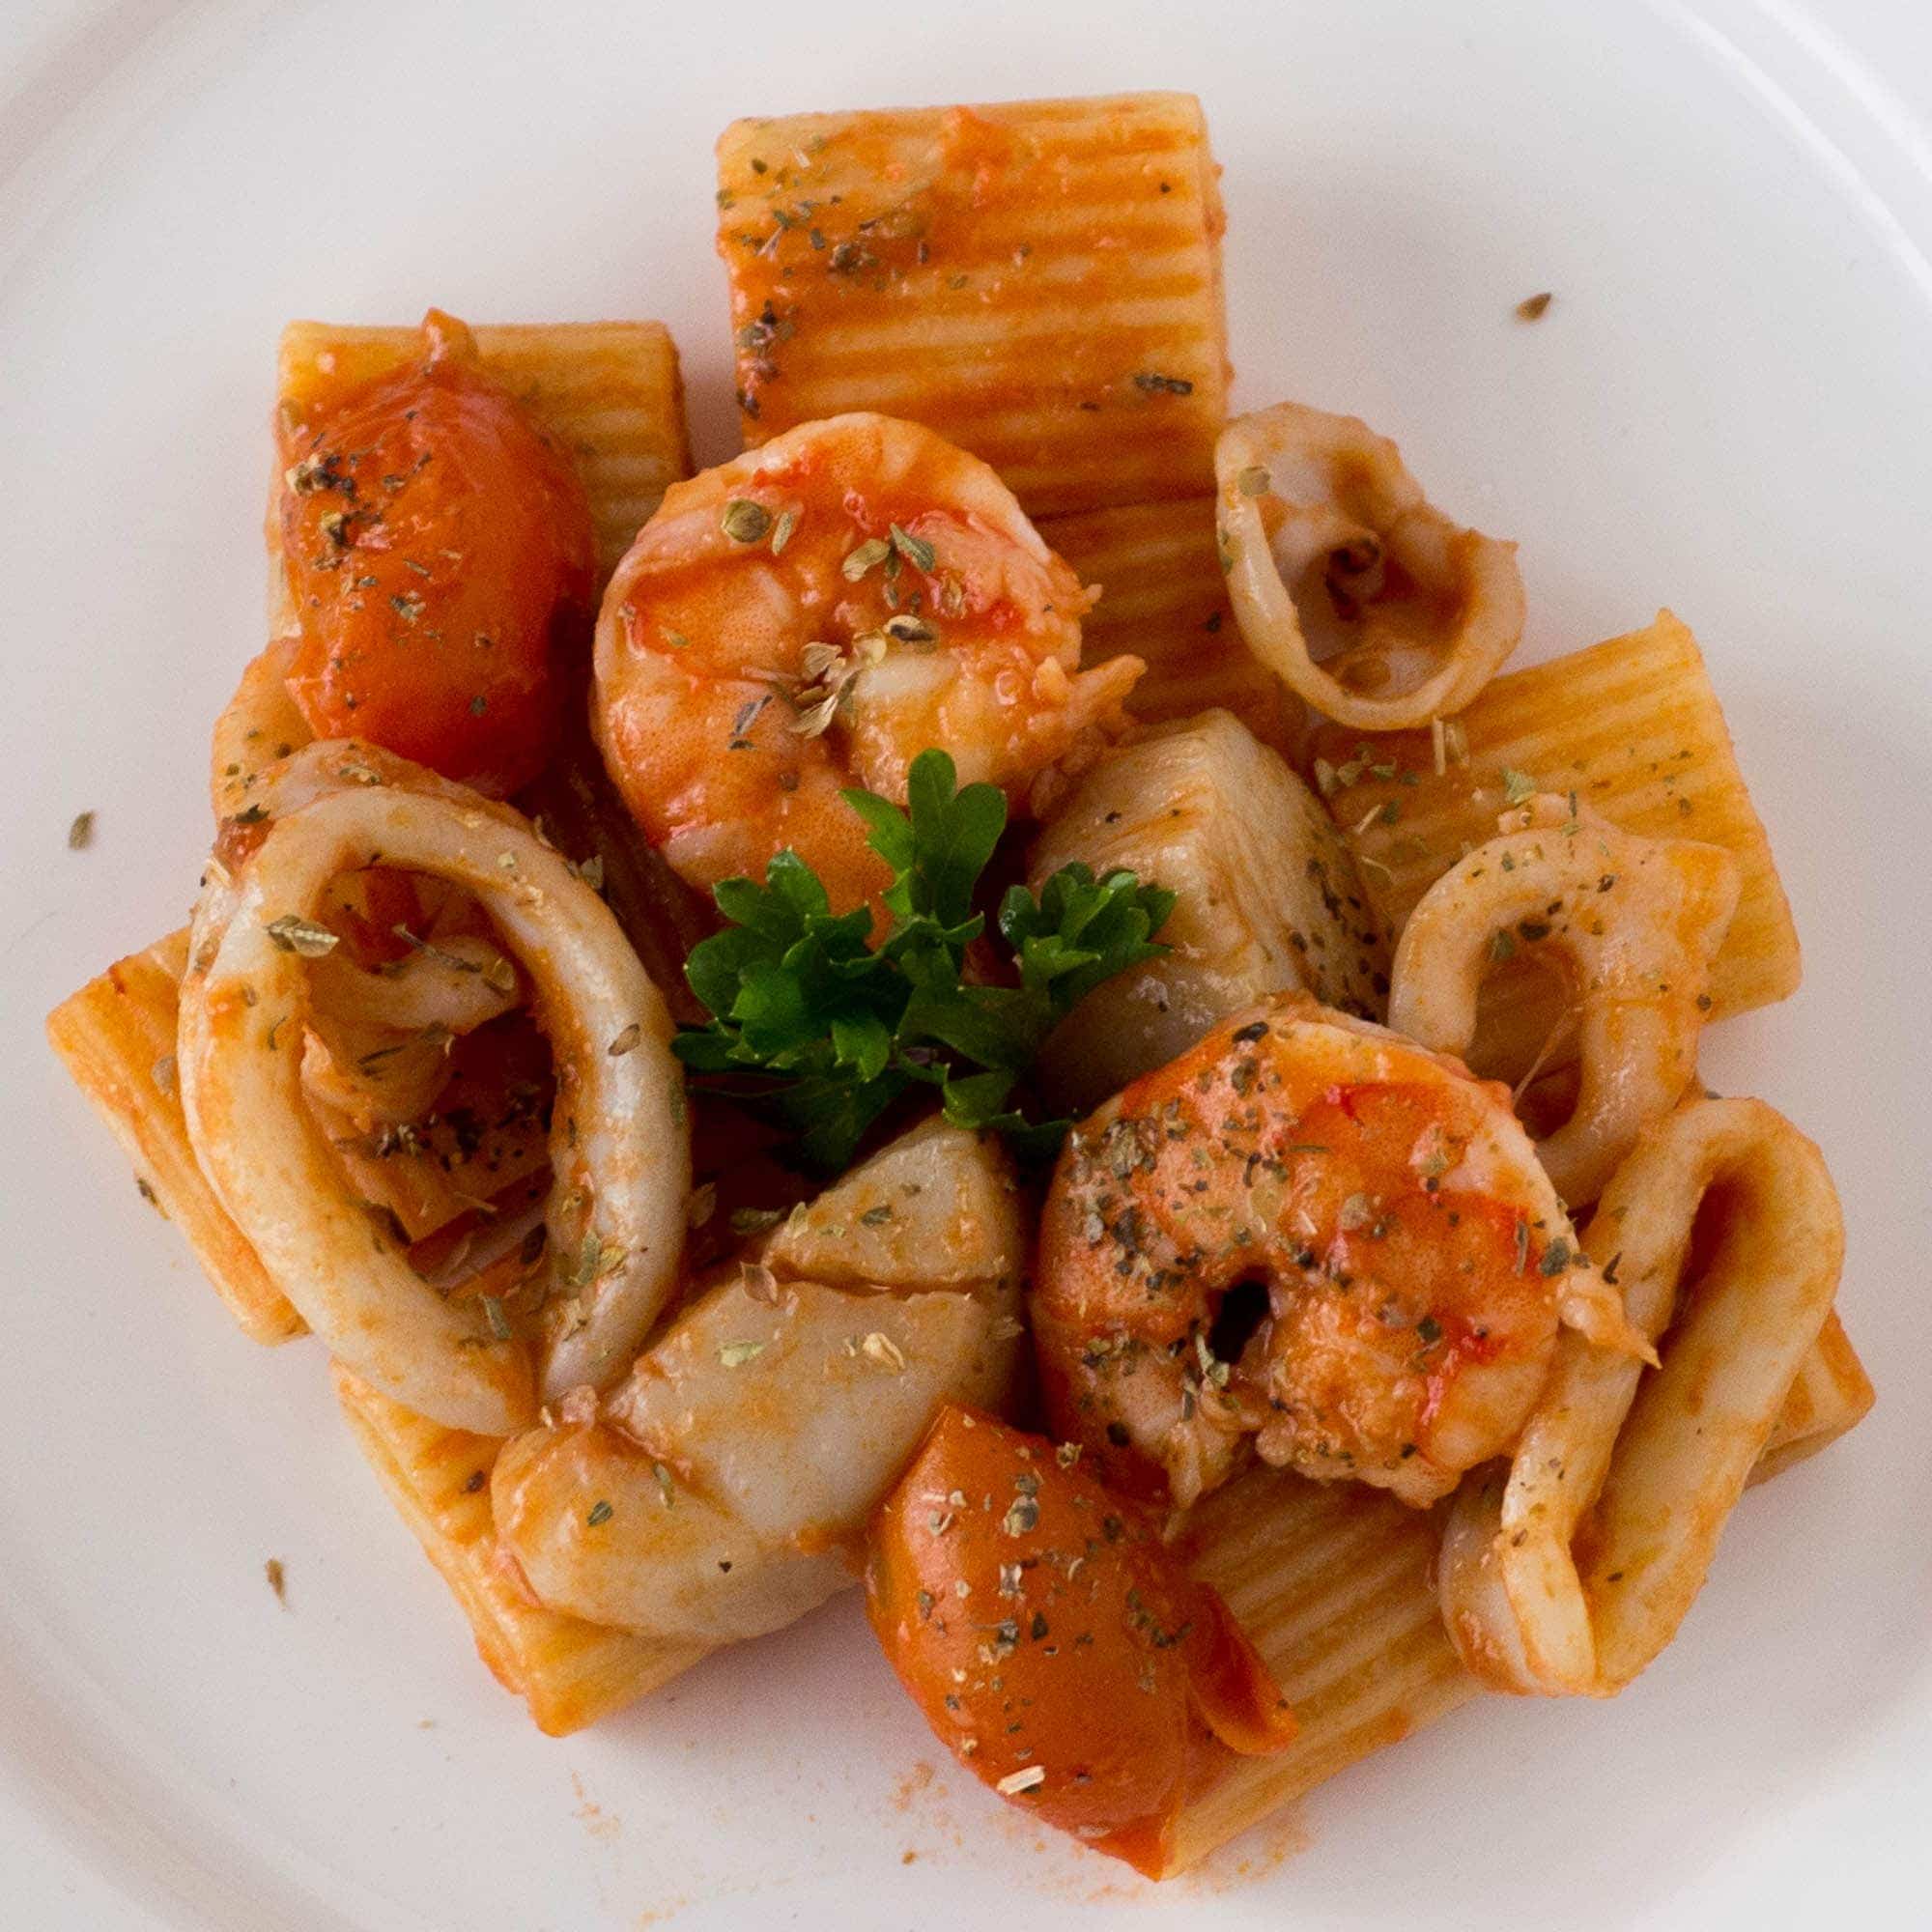 A plate of pasta with shrimp, tomatoes and parsley.